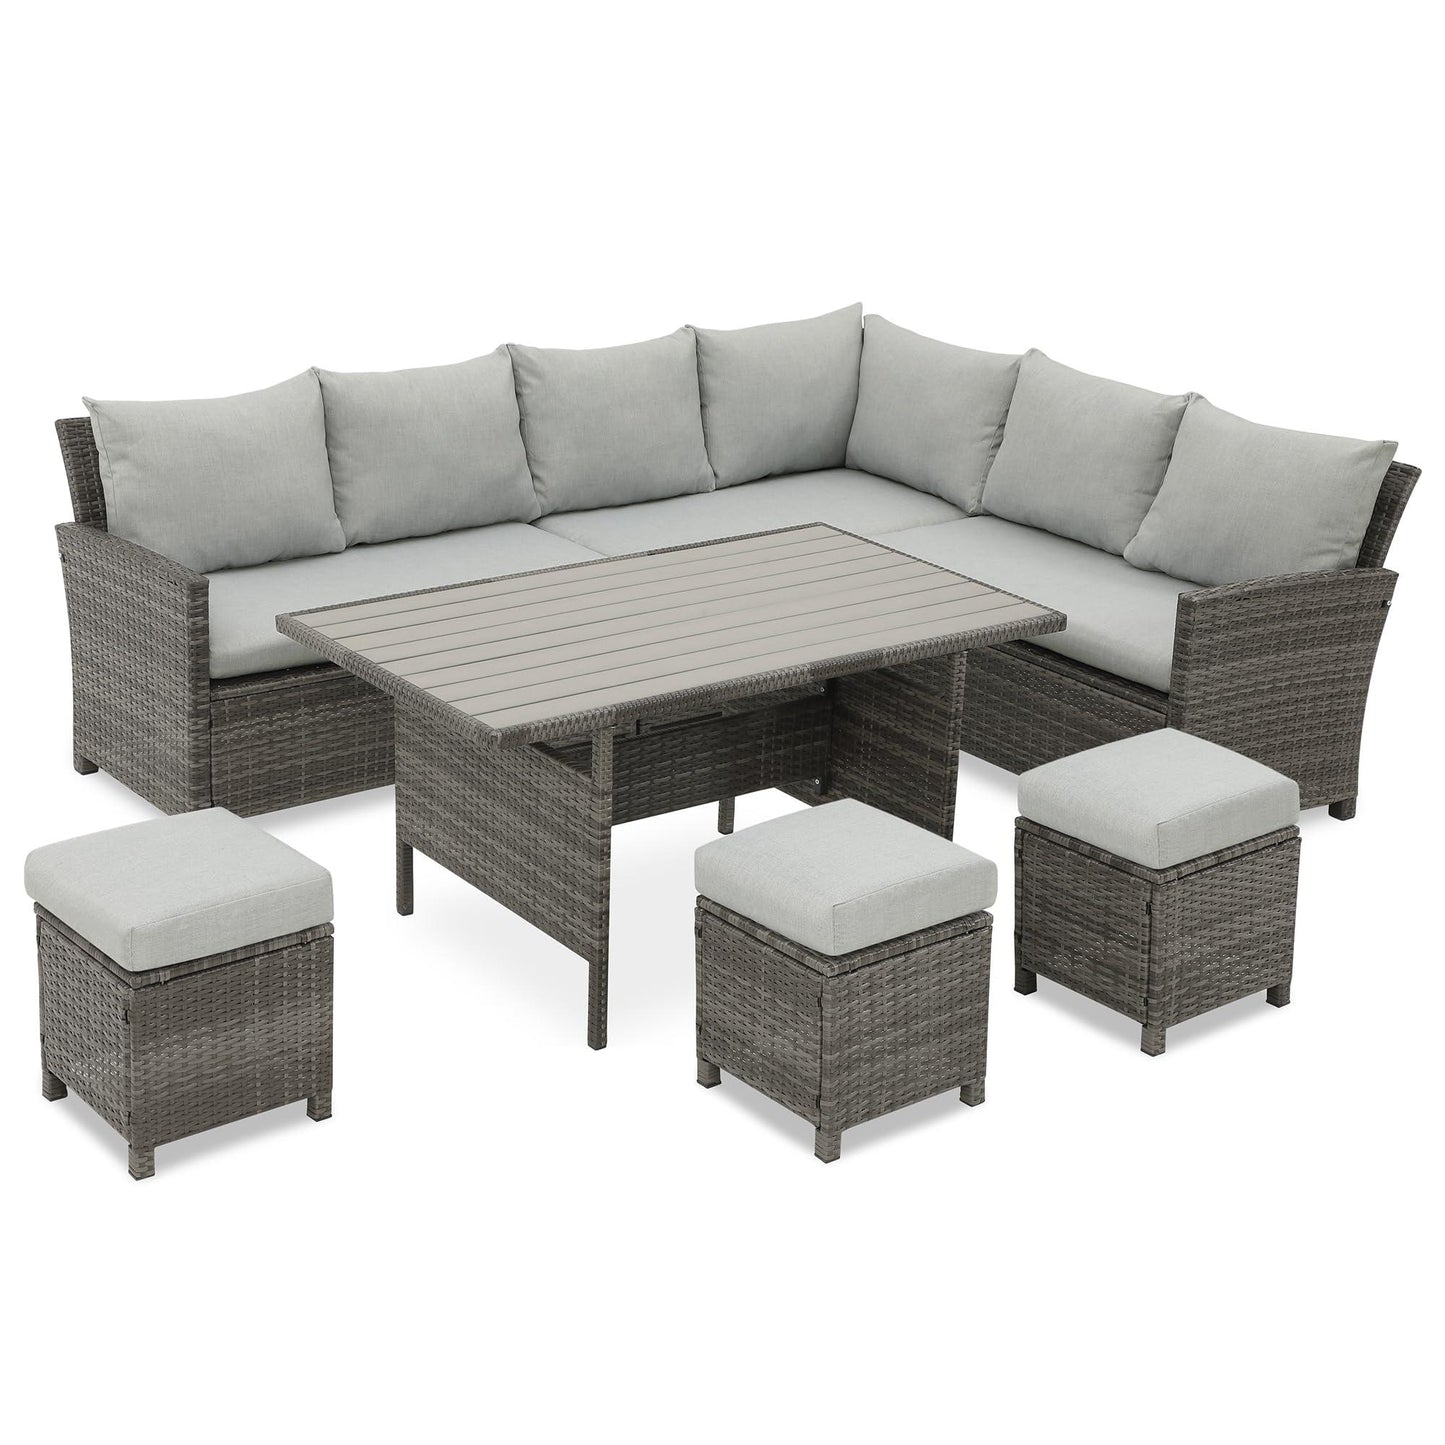 Wisteria Lane Patio Furniture Set, 7 Piece High Curved Back Outdoor Dining Sectional Sofa with Dining Table and Chair, All Weather Wicker Conversation Set with Ottoman, Grey - CookCave